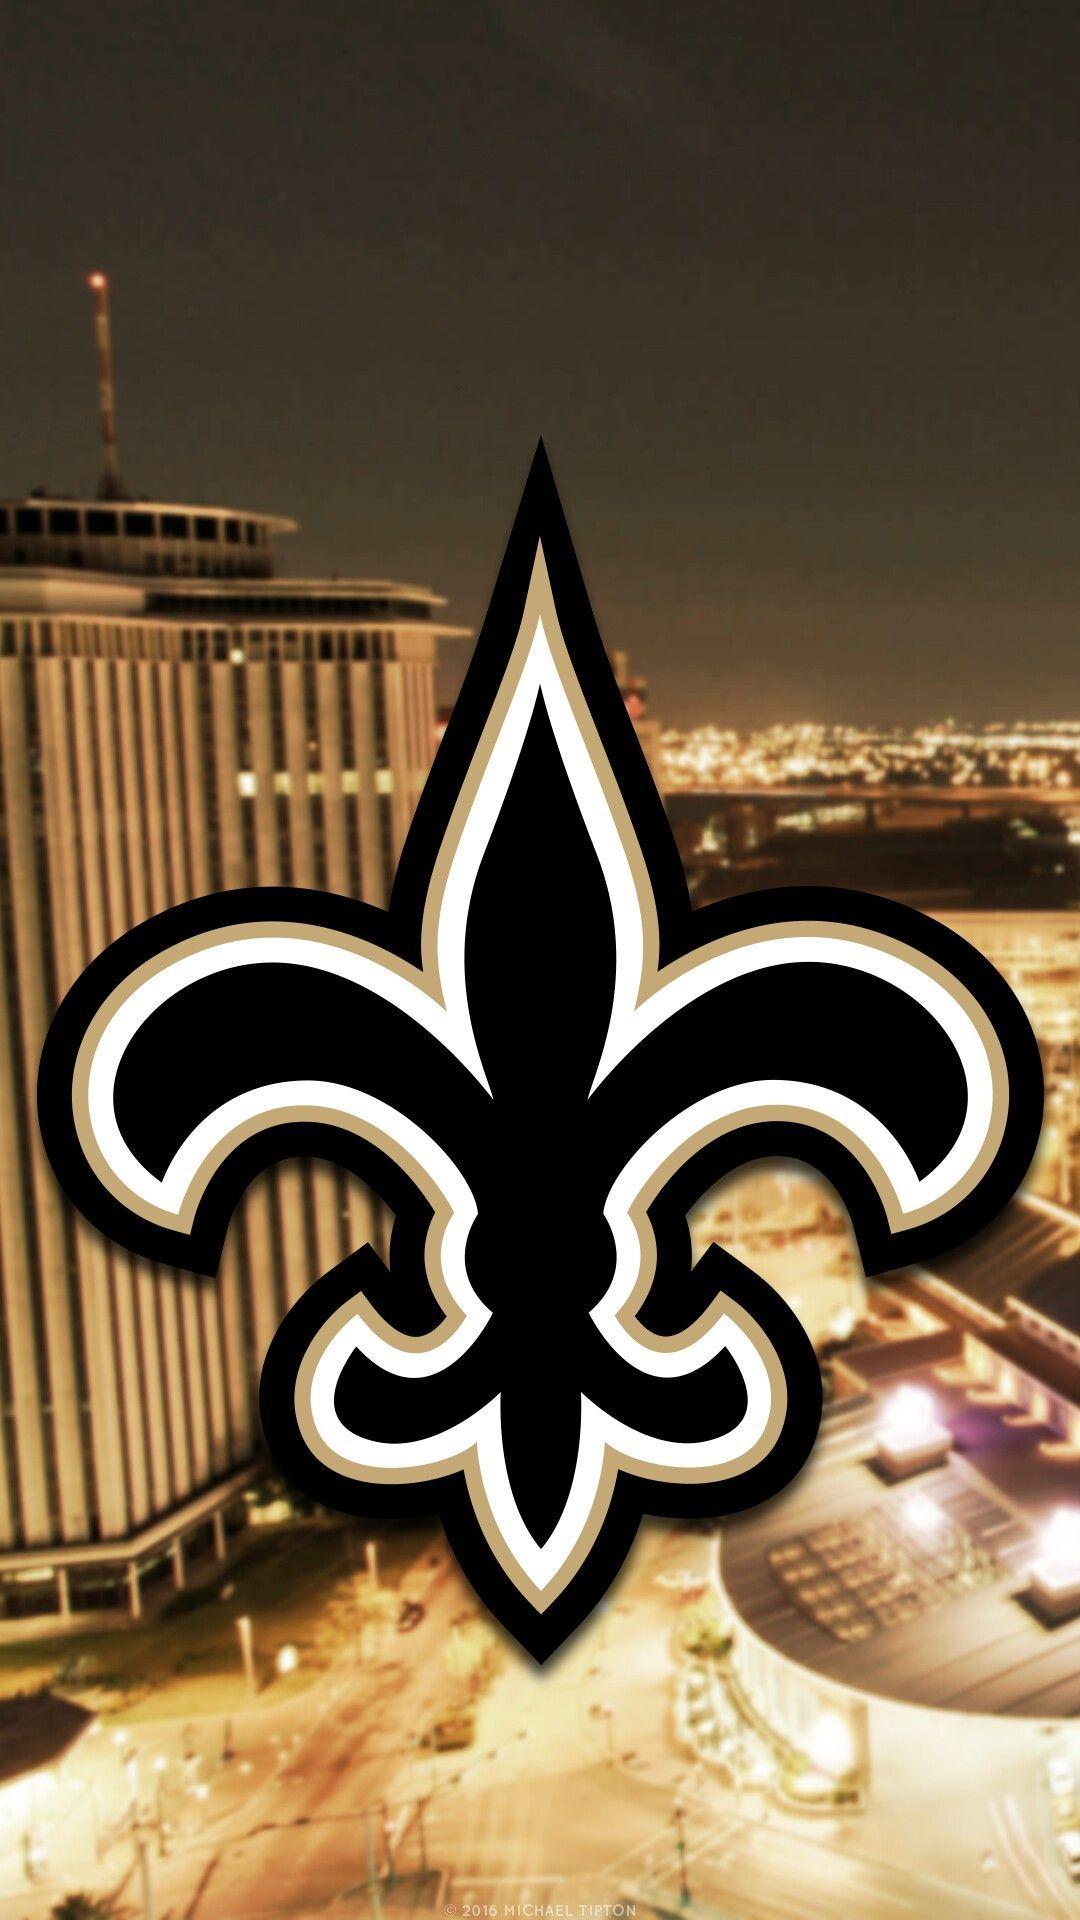 New Orleans Saints IPhone & Android Wallpaper. My New Orleans